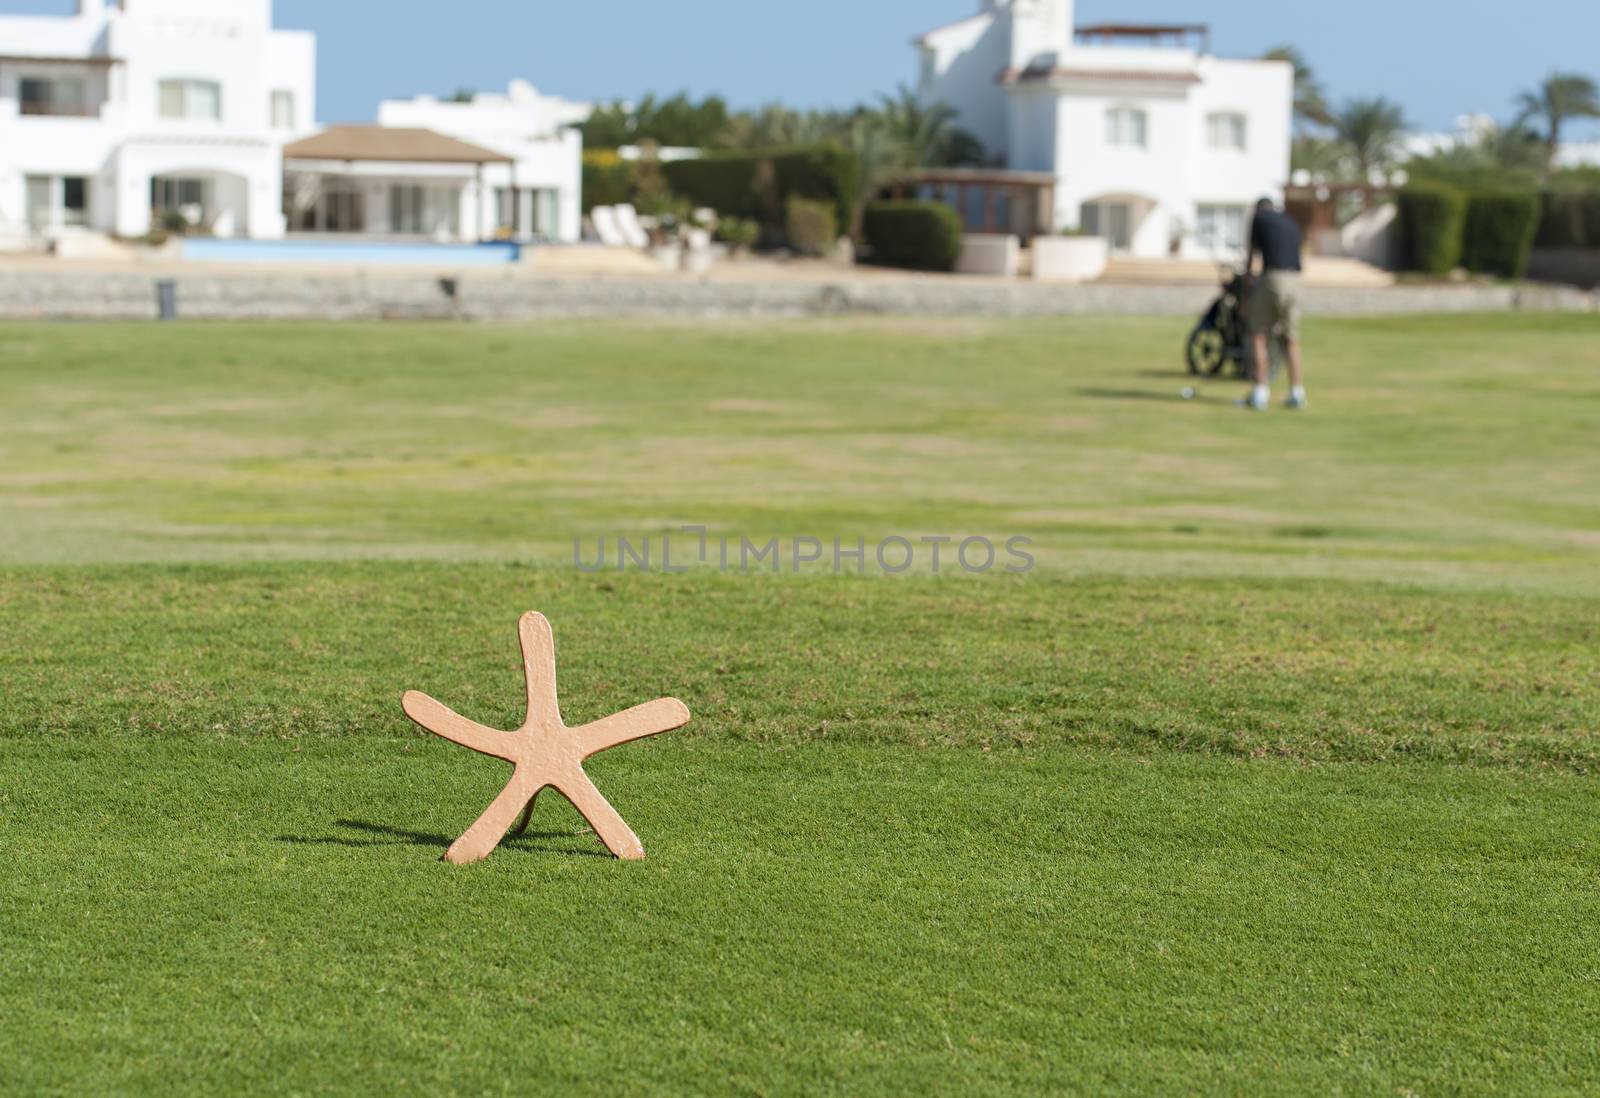 Star shaped tee marker on a golf course with golfer in the distance on fairway